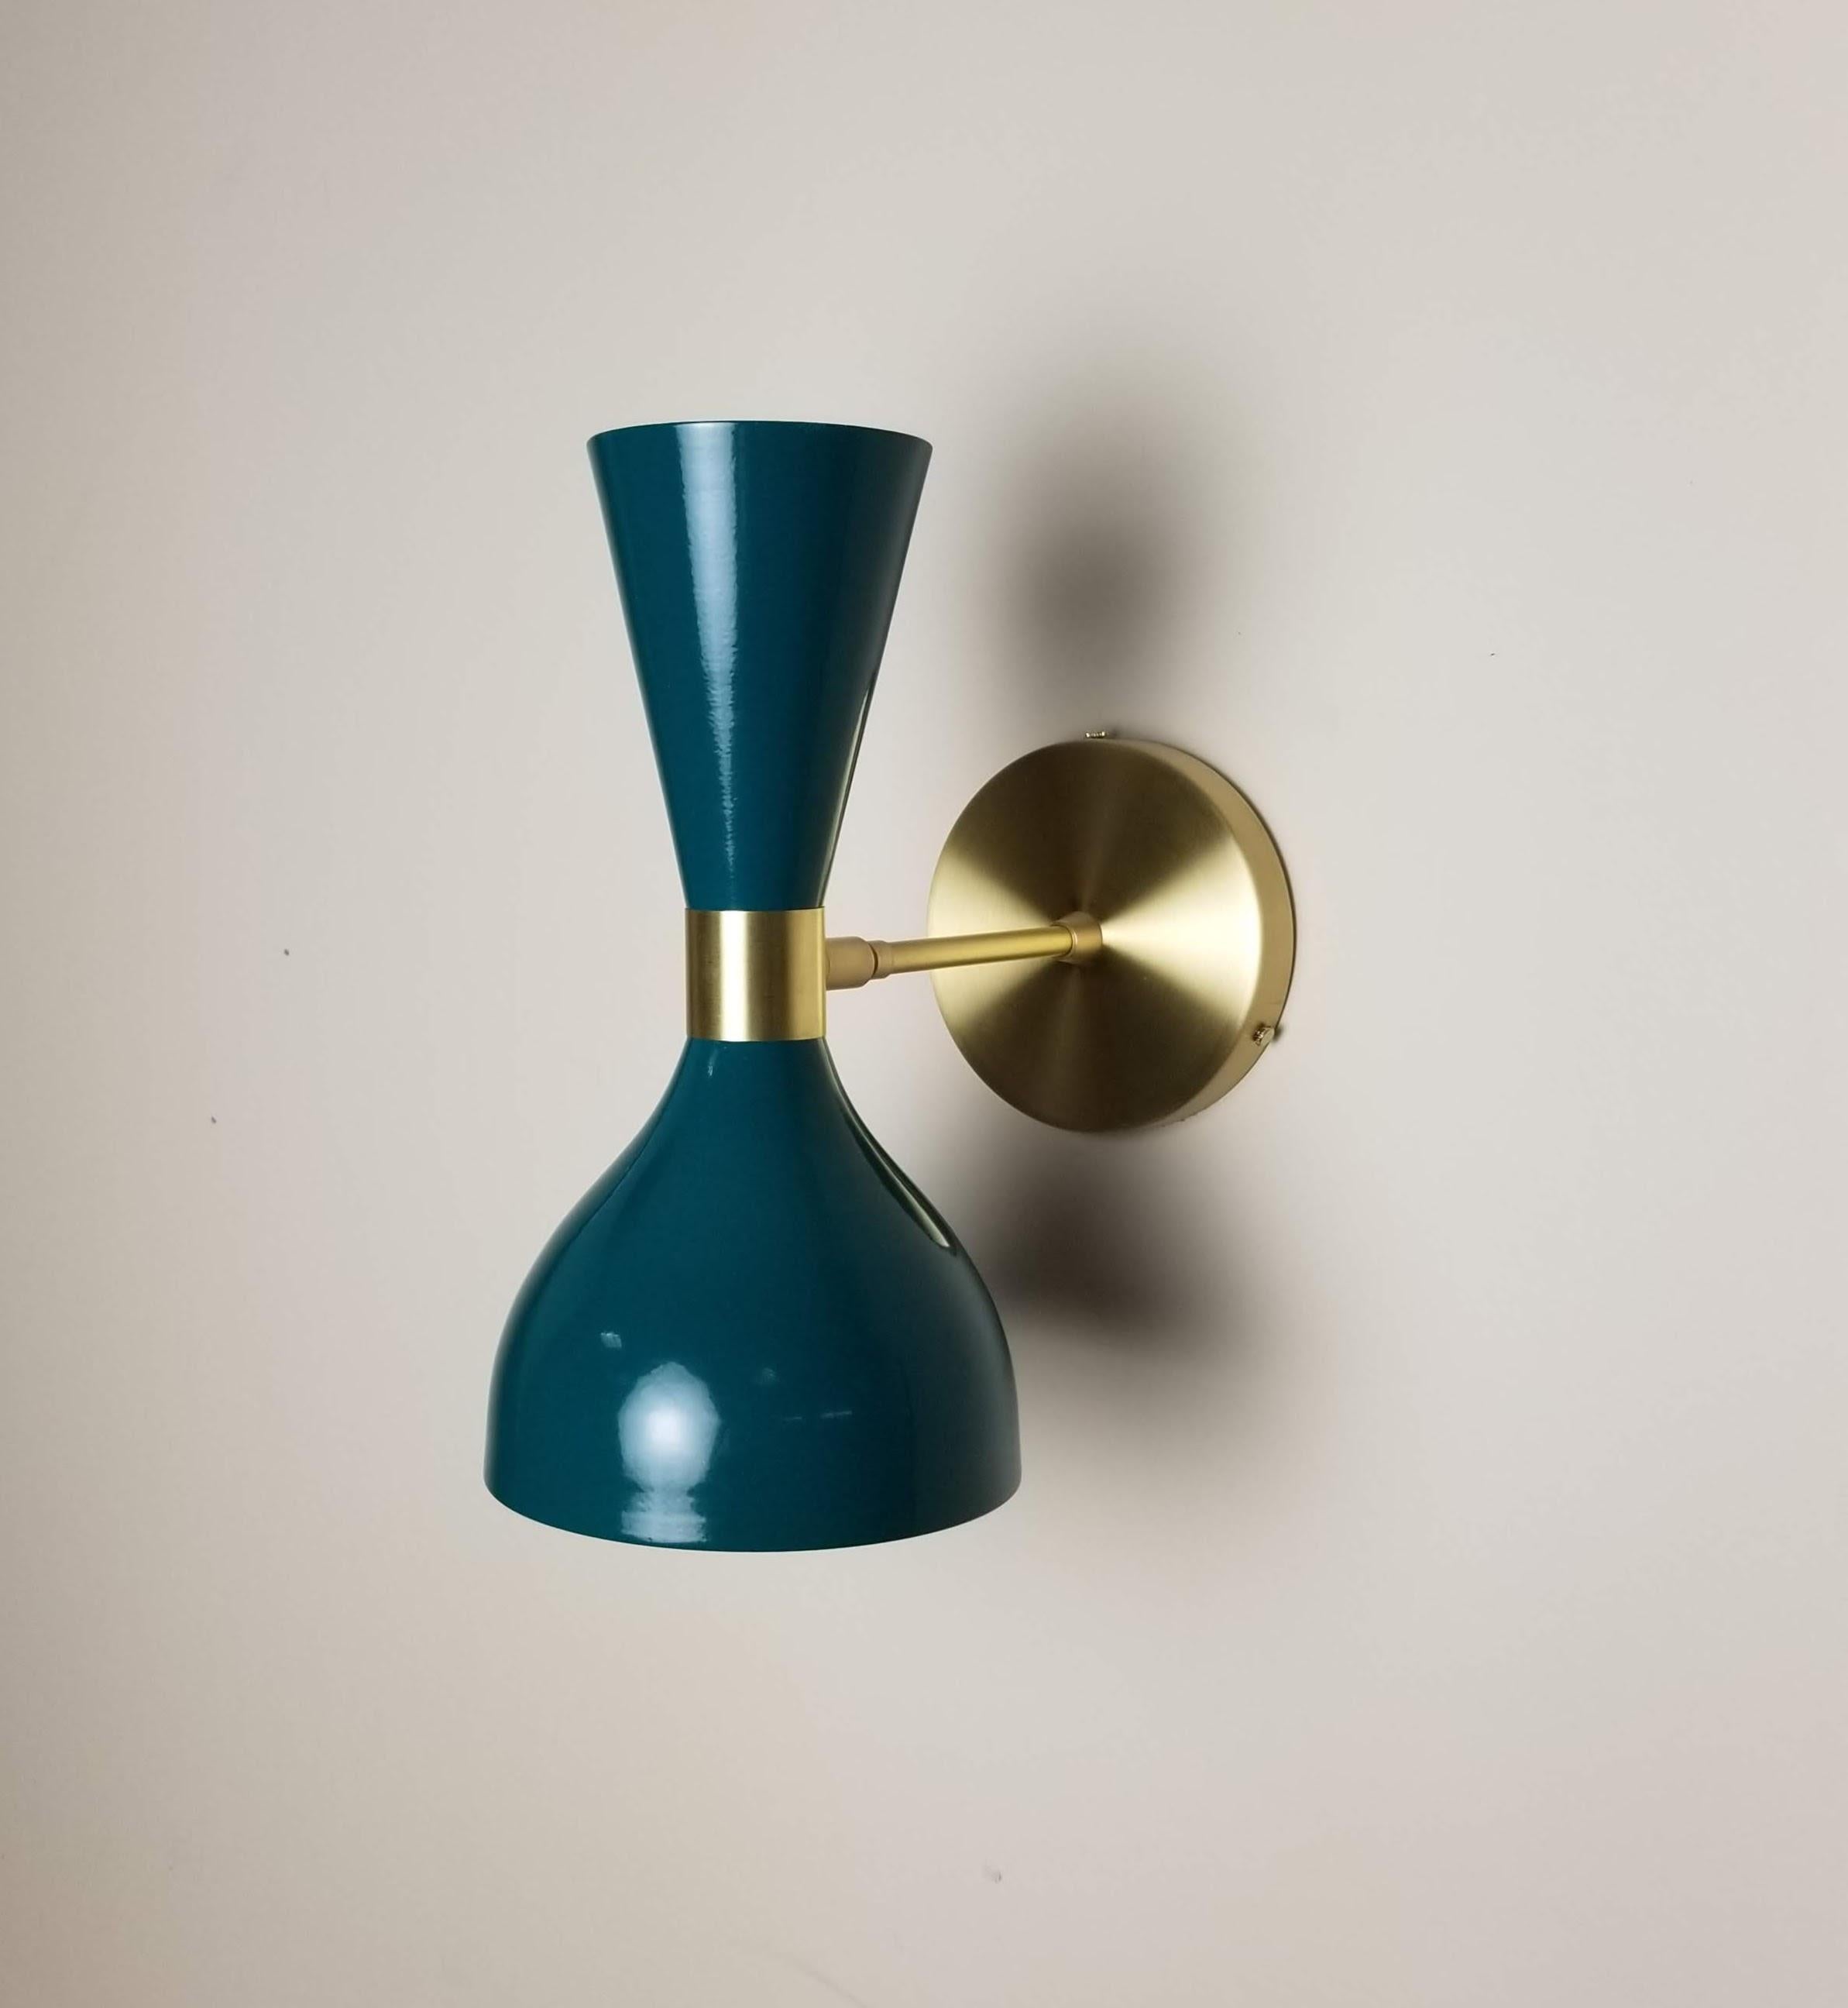 Our best-selling LUDO wall sconce or reading light shown in natural brass and our popular 